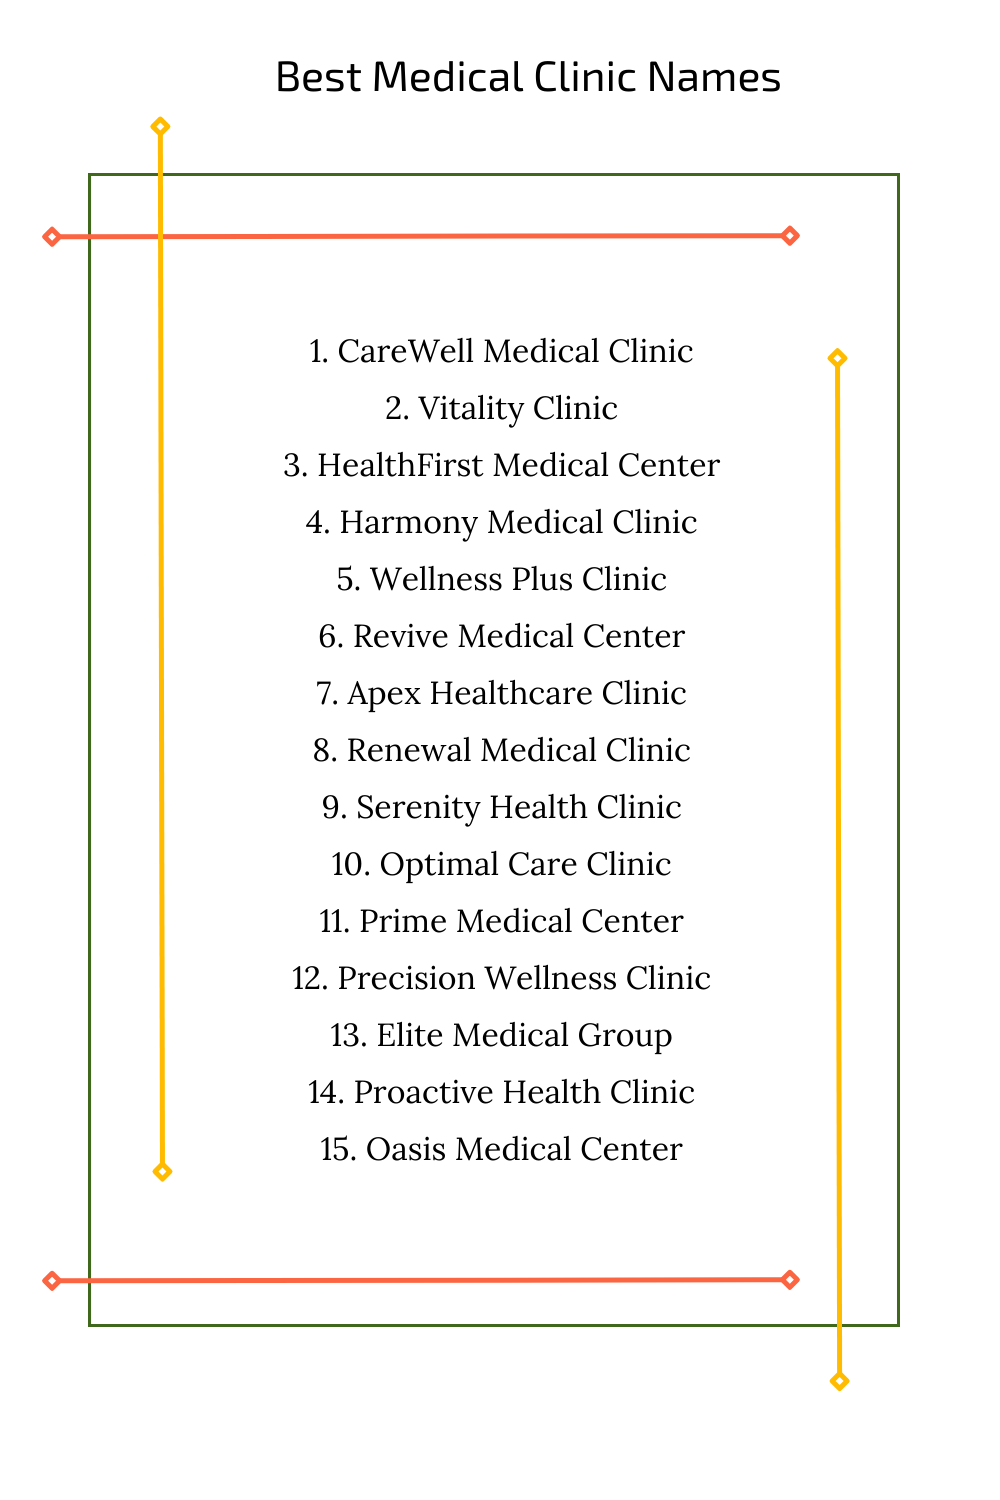 Best Medical Clinic Names